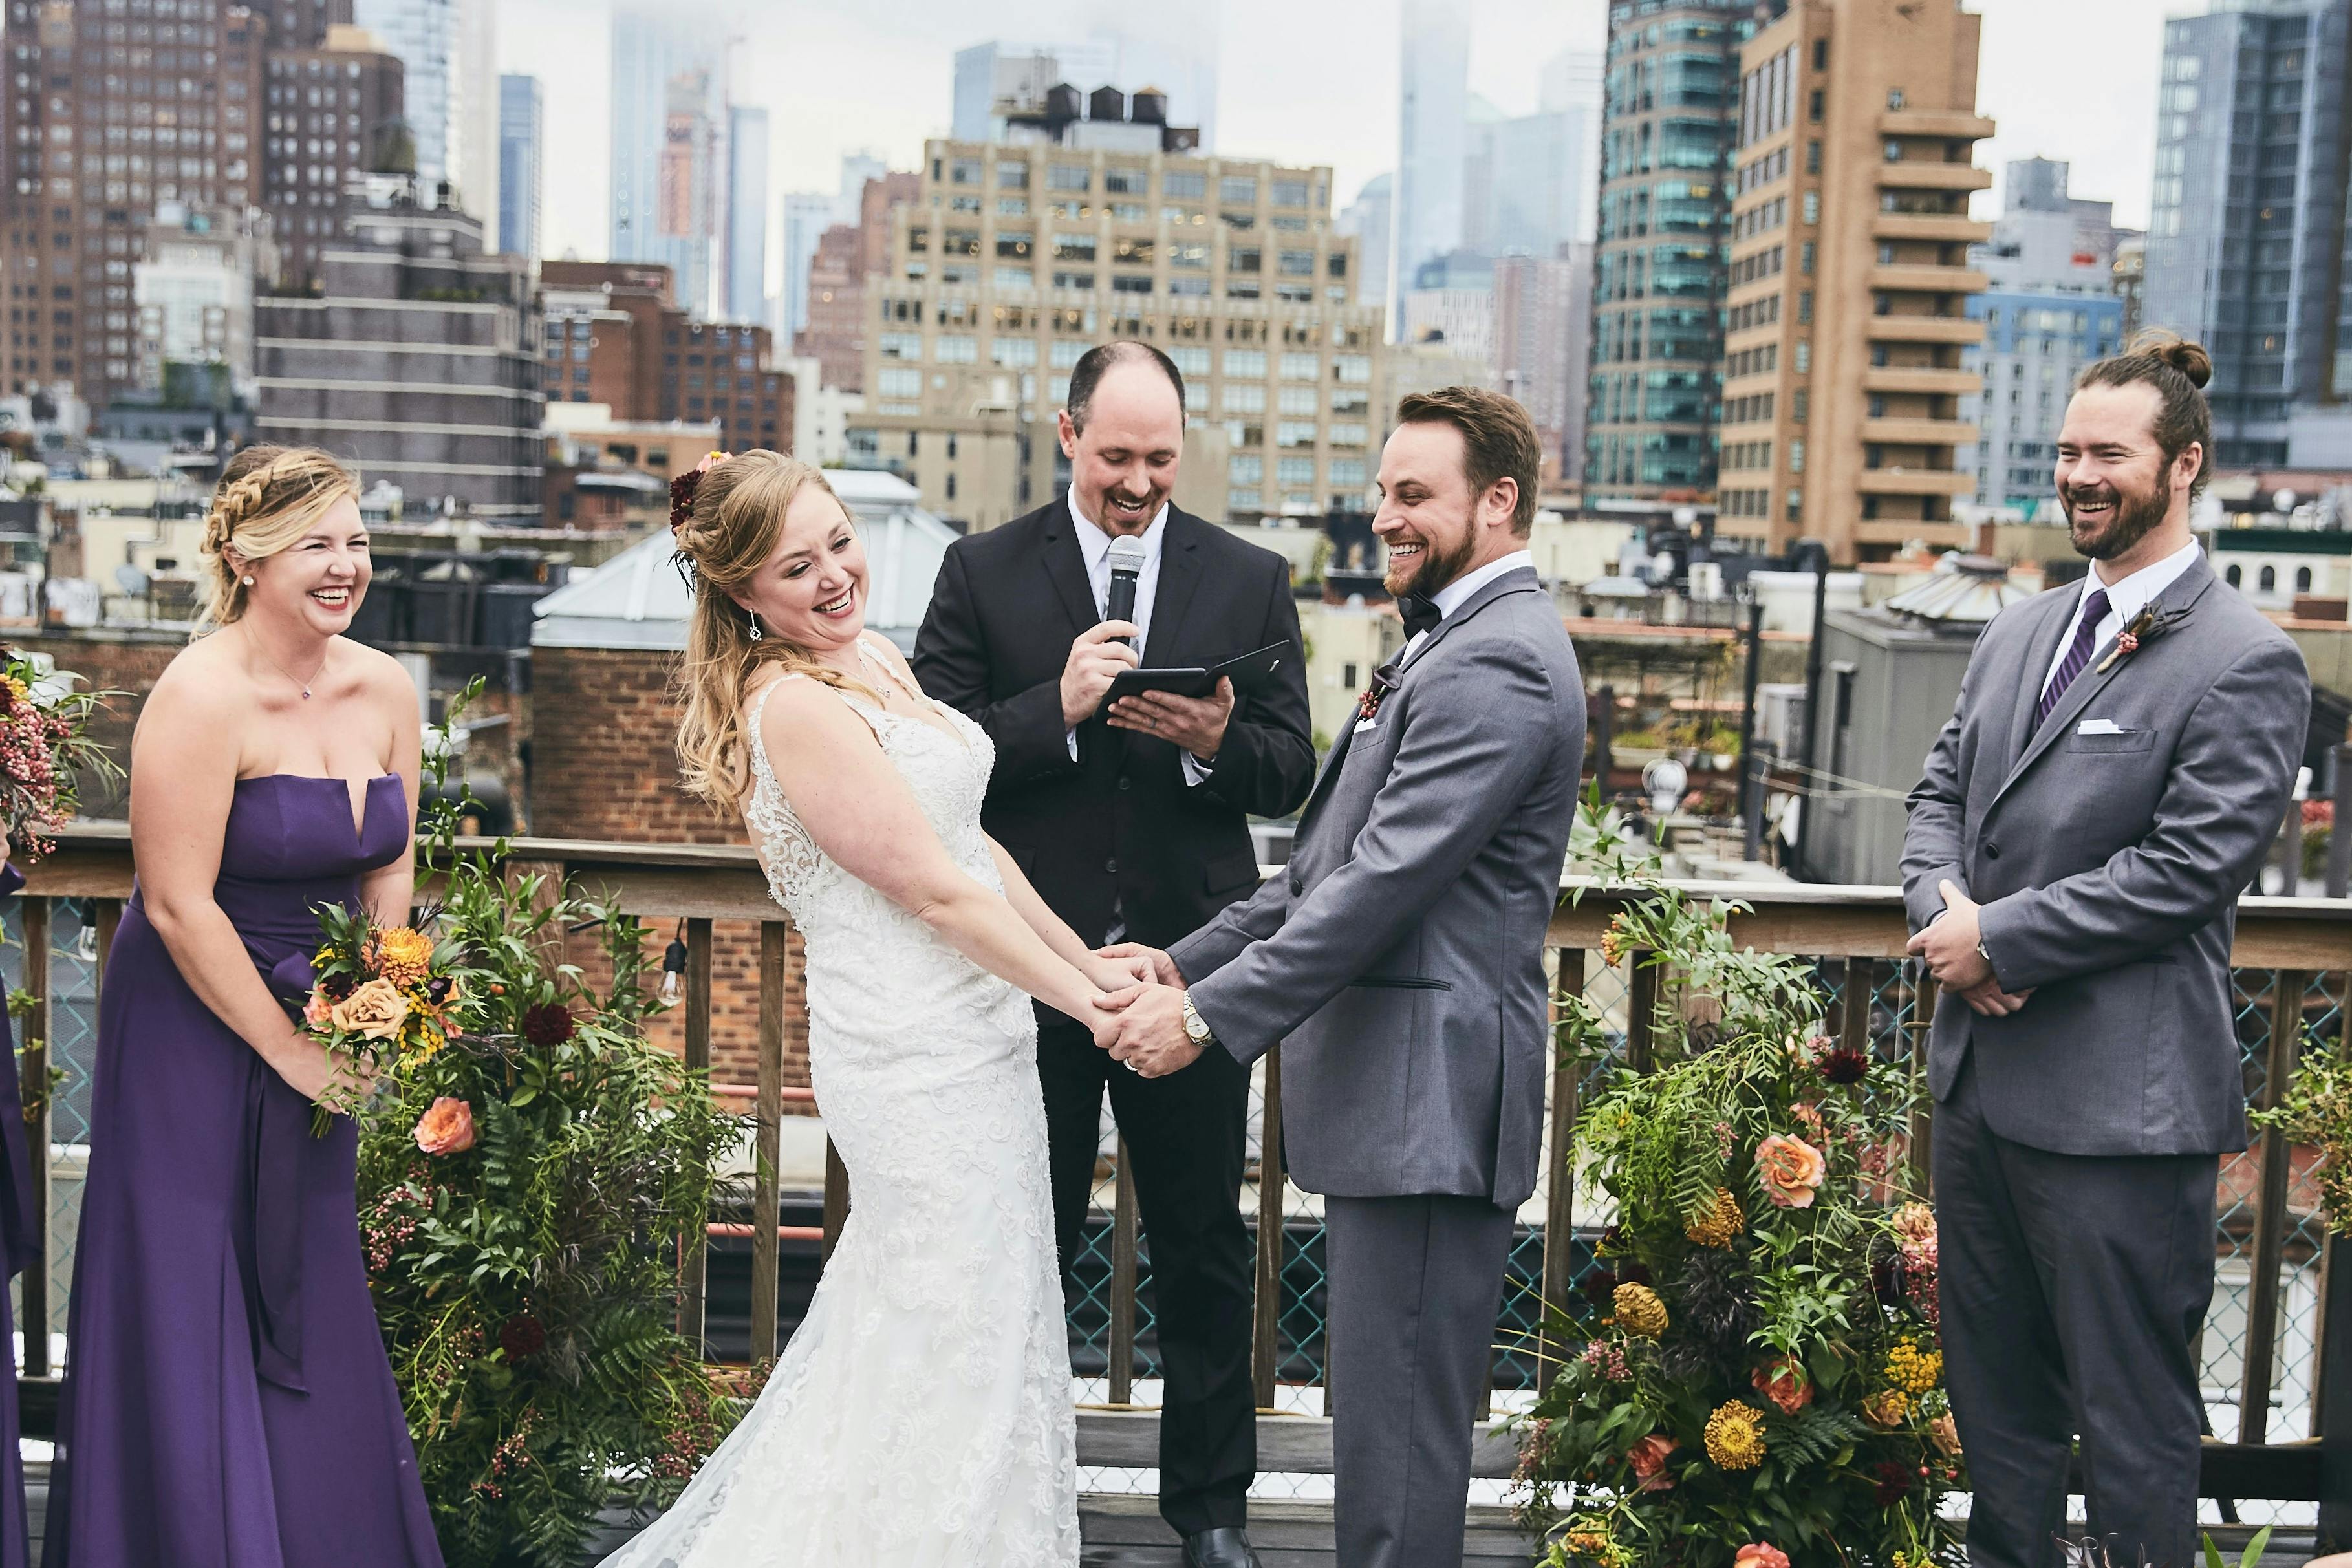 Soho Rooftop Wedding With City Skyline View | PartySlate